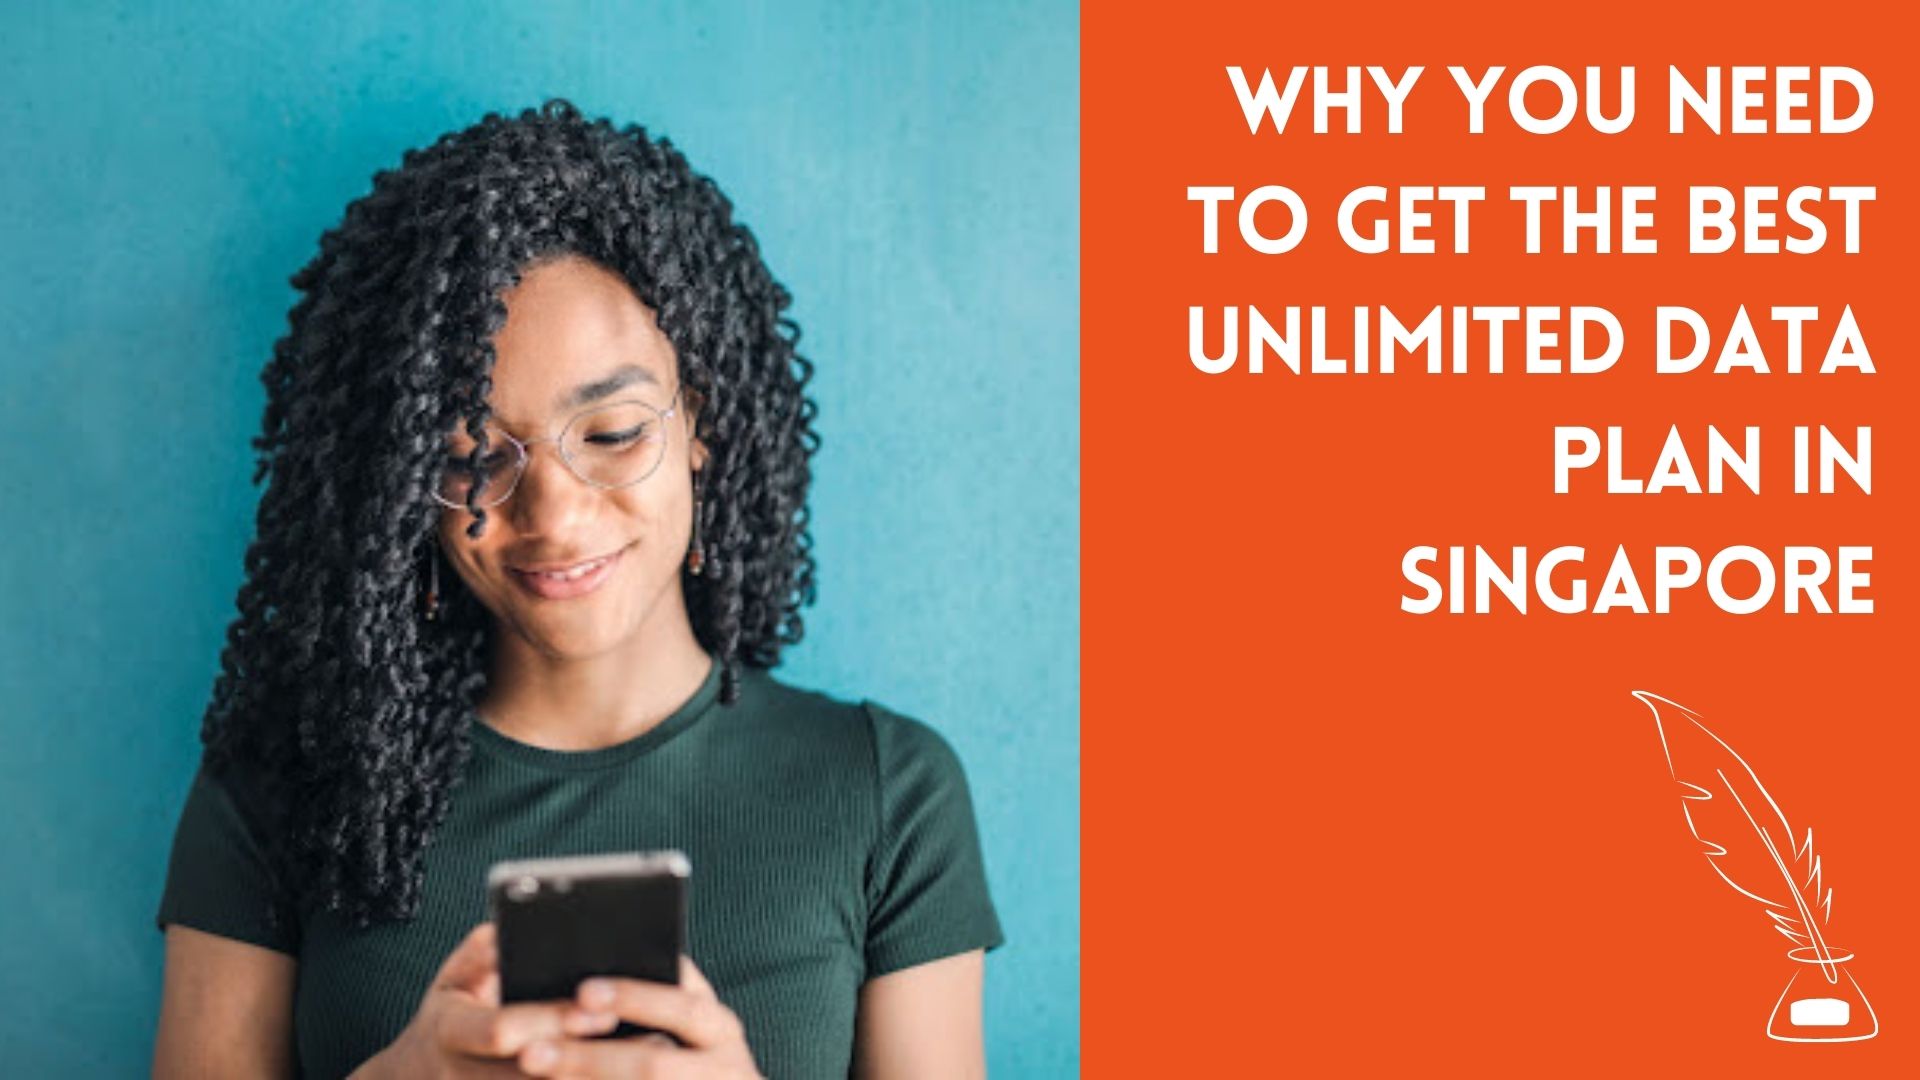 Why You Need to Get the Best Unlimited Data Plan in Singapore